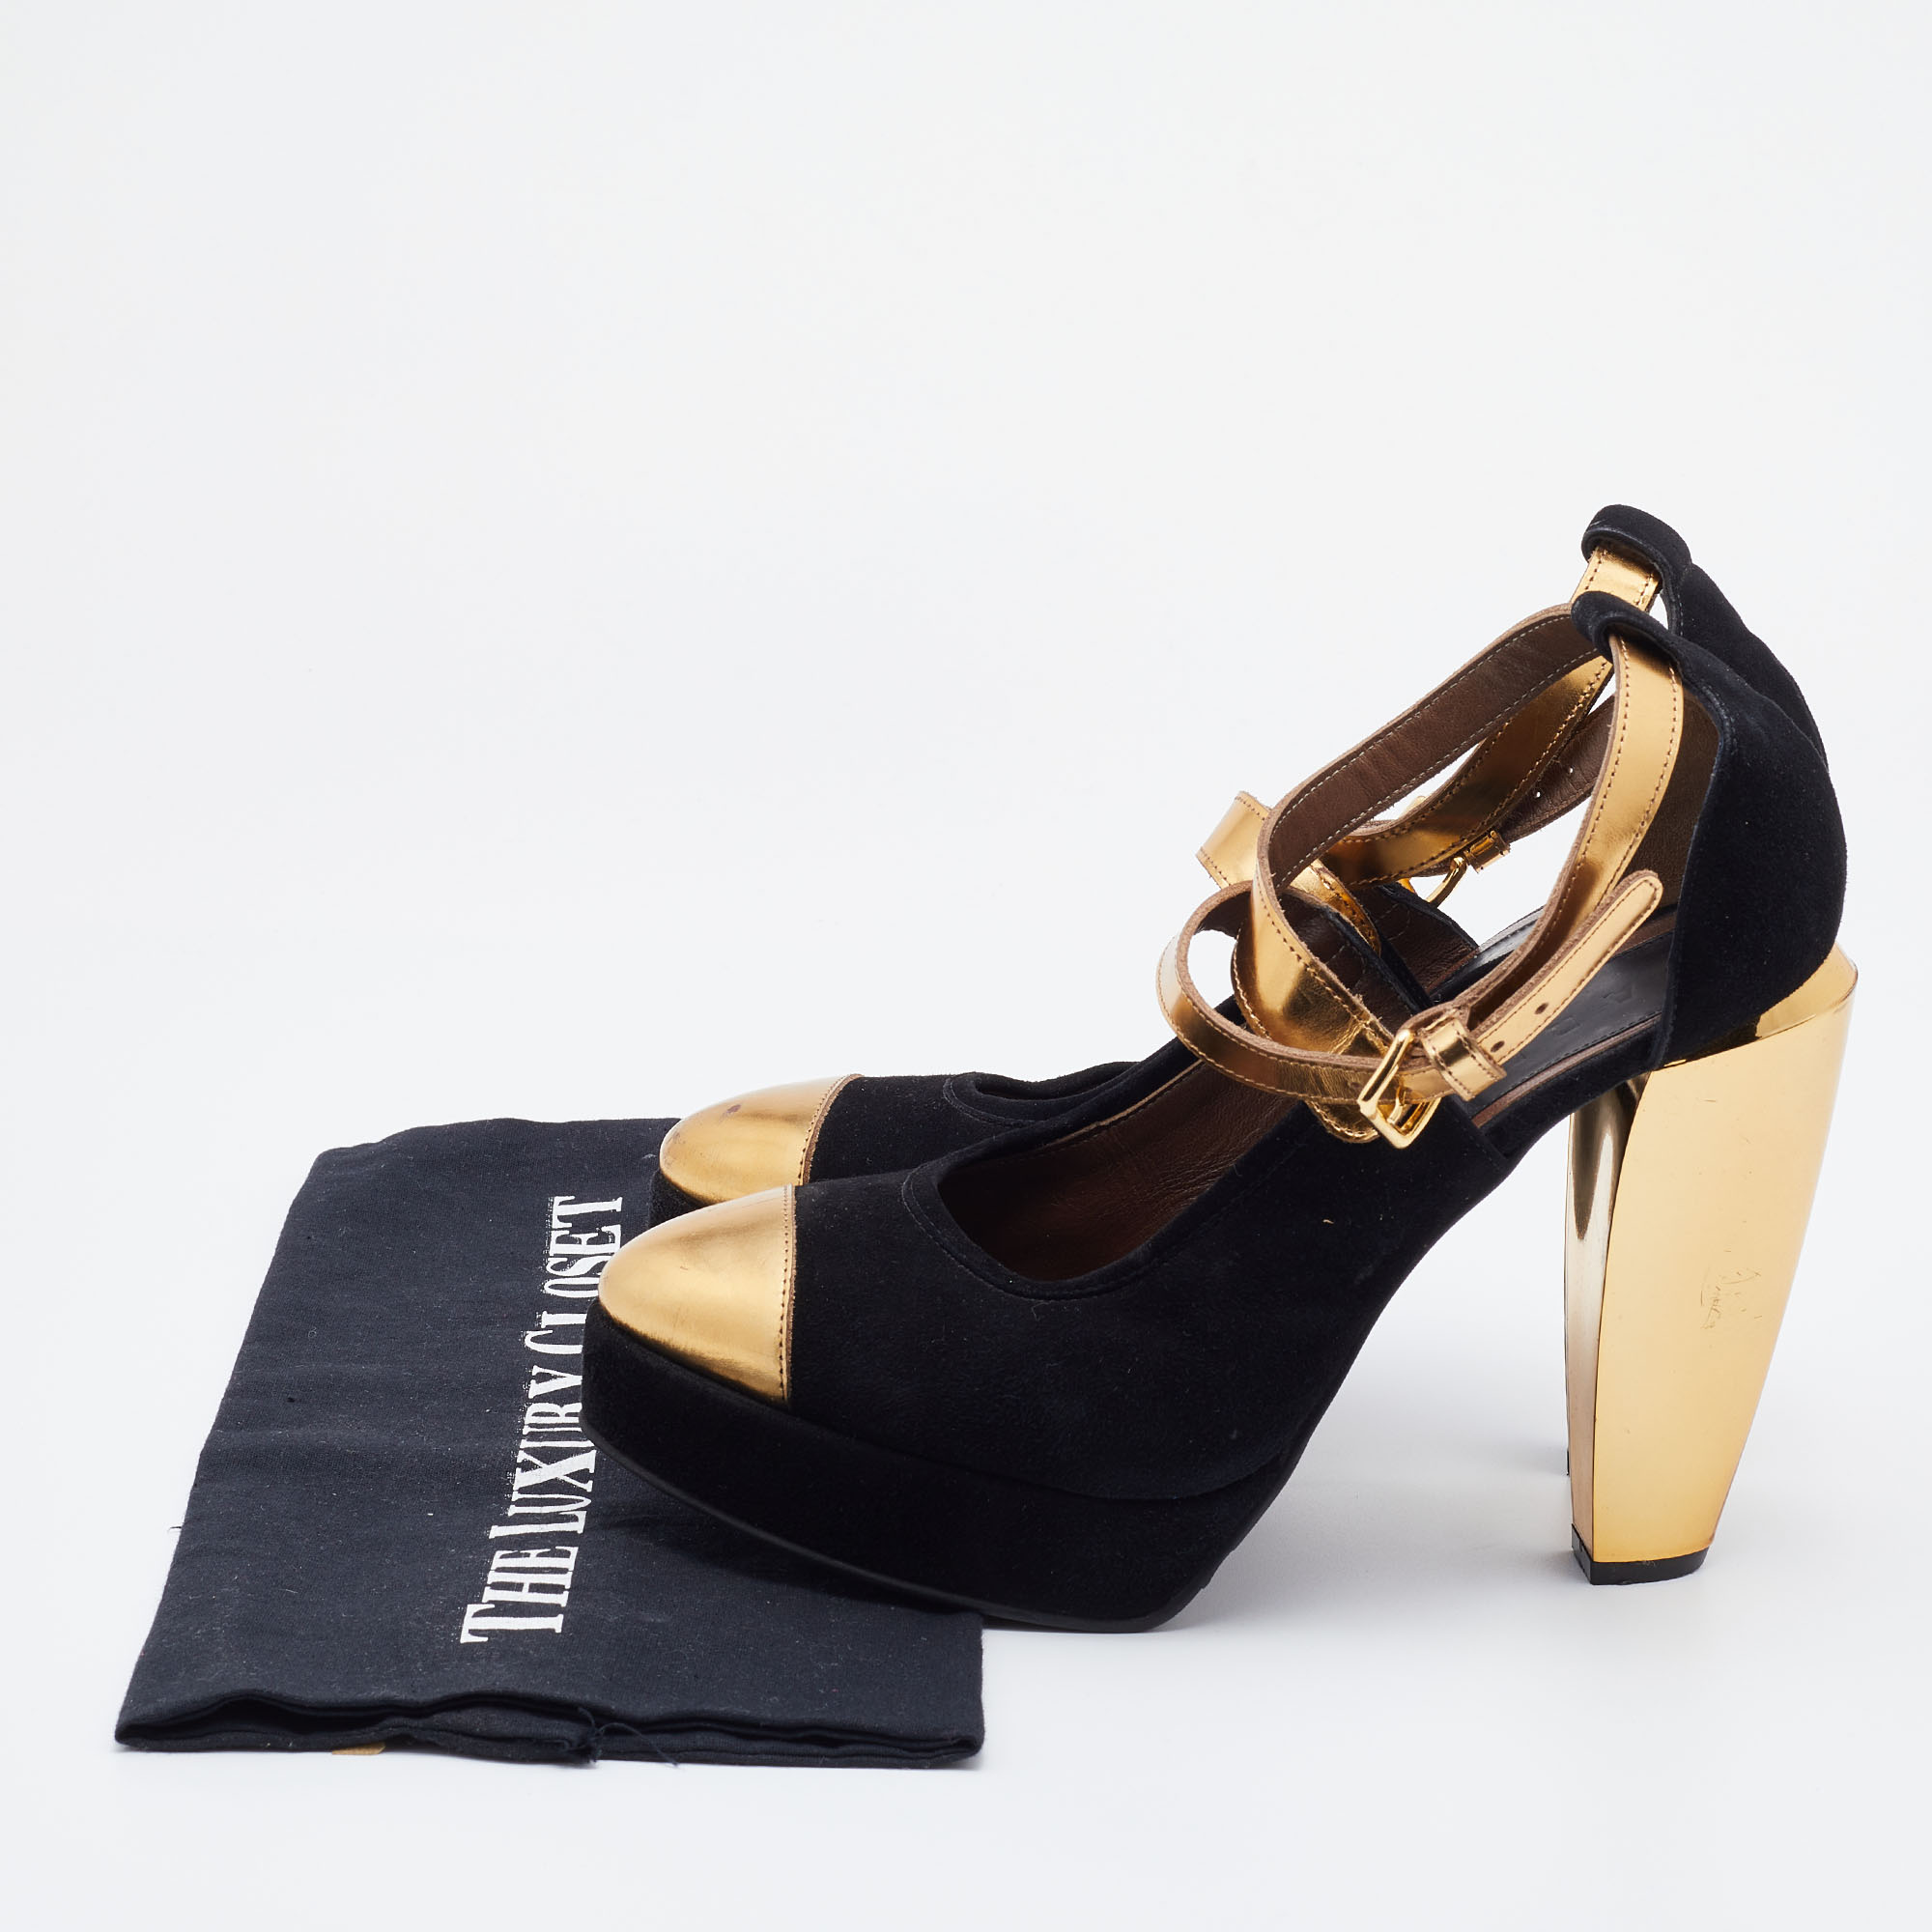 Marni Black/Gold Suede And Leather Platforms Ankle Strap Pumps Size 39